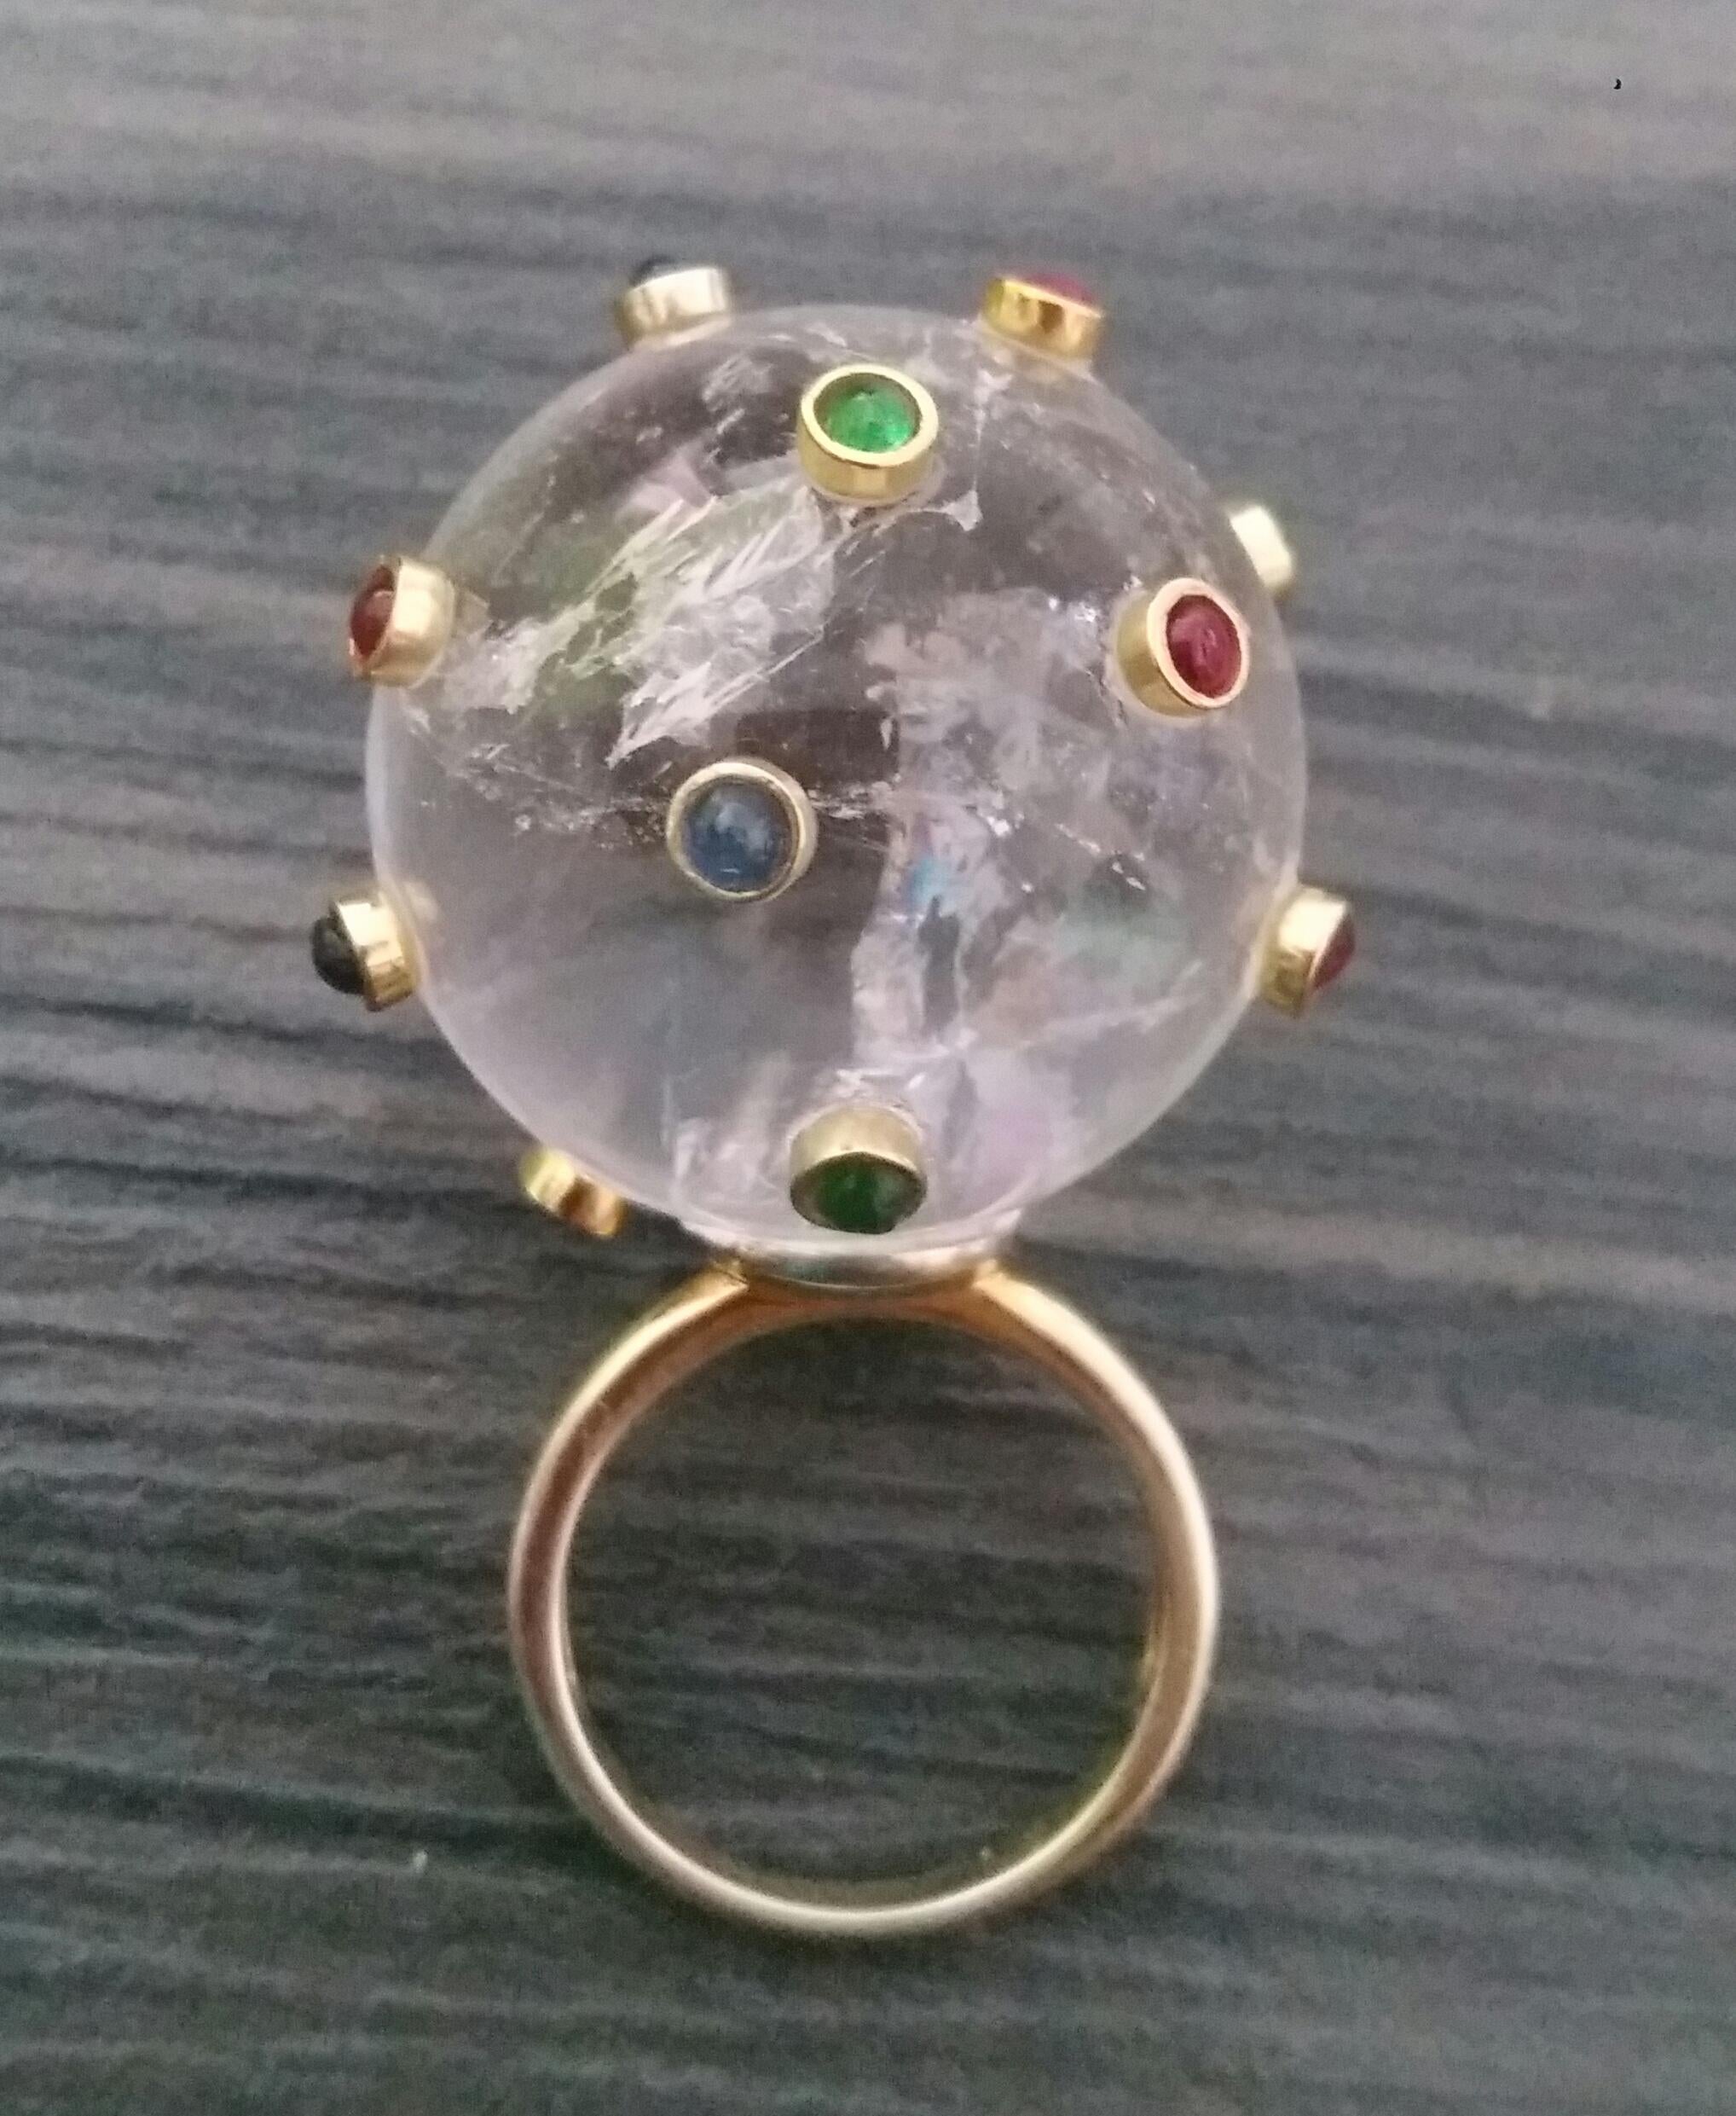 Extremely Stylish and Unique Ring composed by a Natural Quartz  Sphere measuring 27 mm in diameter and weighing 150 Carats ,decorated with 15 small round Rubies,Emeralds and Blue Sapphires set in 14K yellow gold bezels.

In 1978 our workshop started